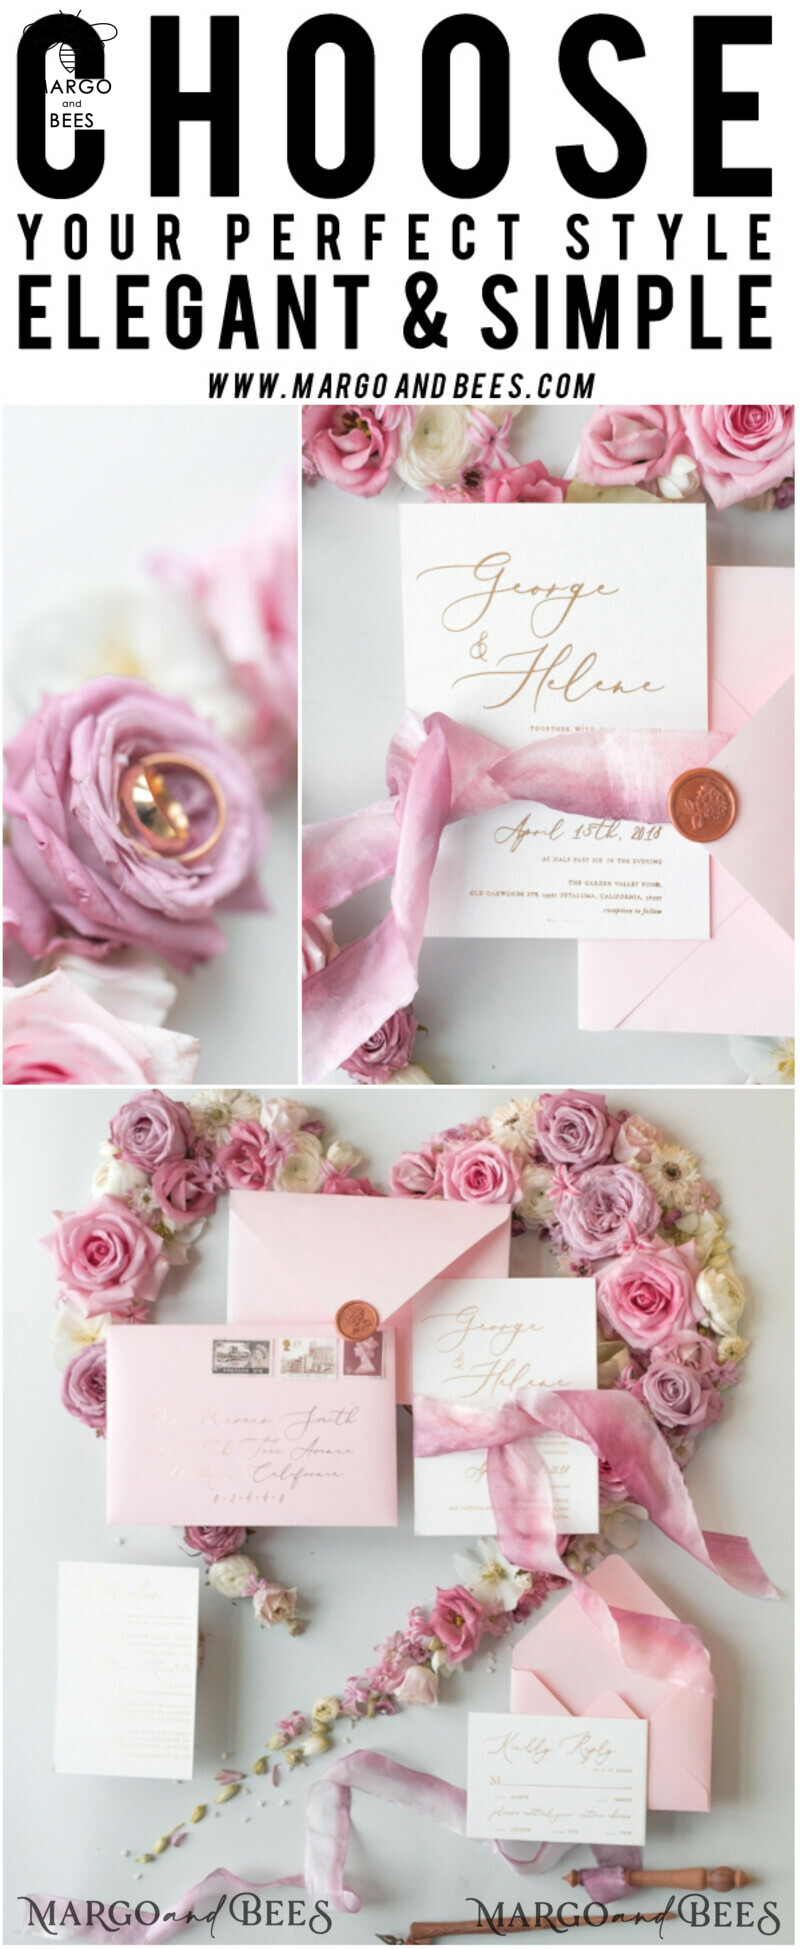 Romantic Blush Pink Wedding Invitations: Vintage Floral Wedding Invitation Suite with Elegant Wedding Cards and Hand Dyed Bow - Glamour Peony Wedding Stationery-50